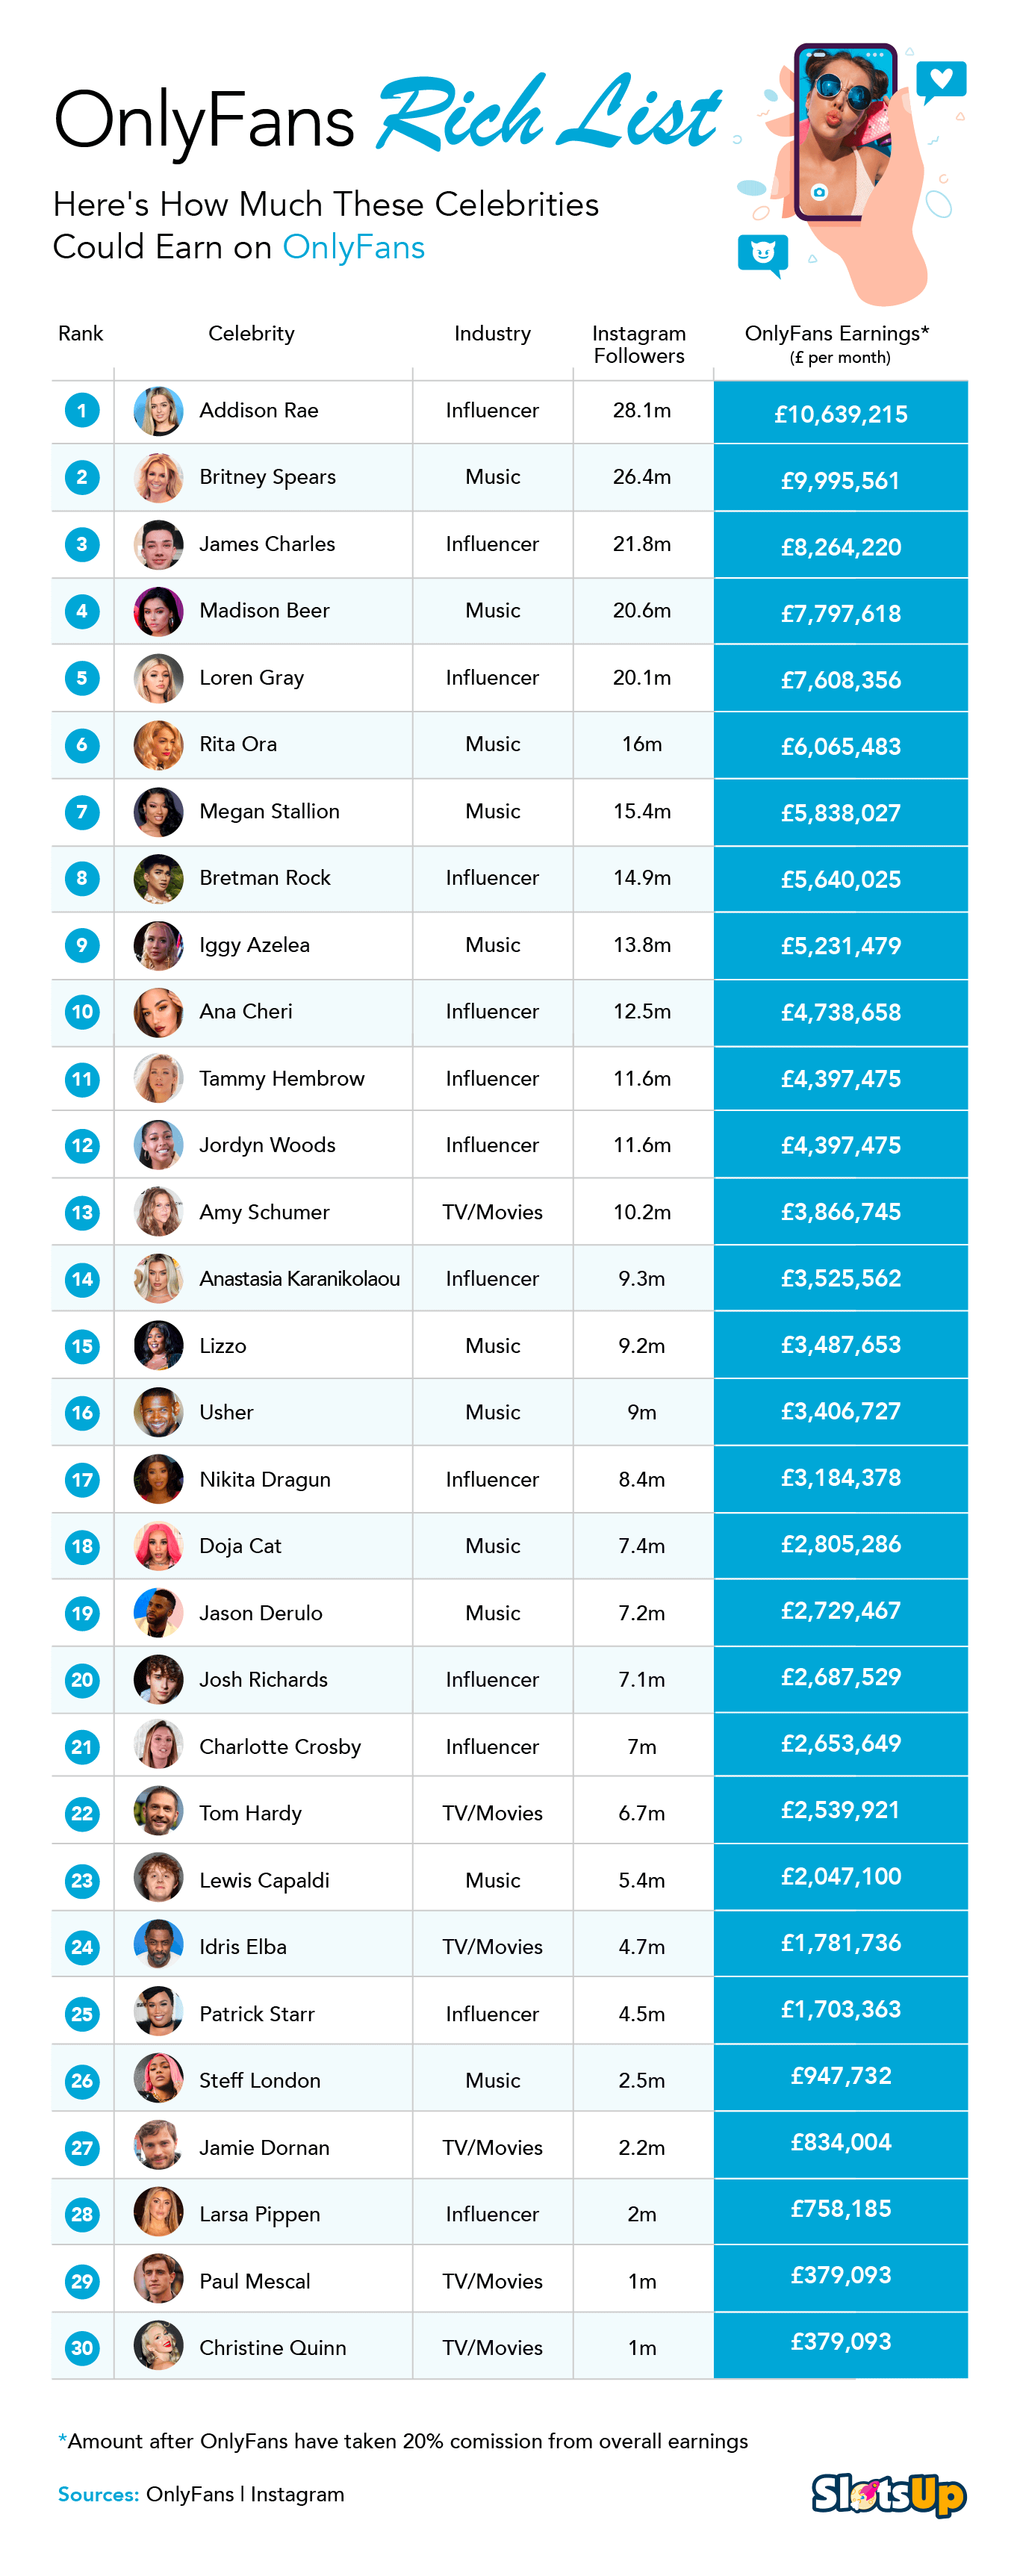 Top-earning onlyfans